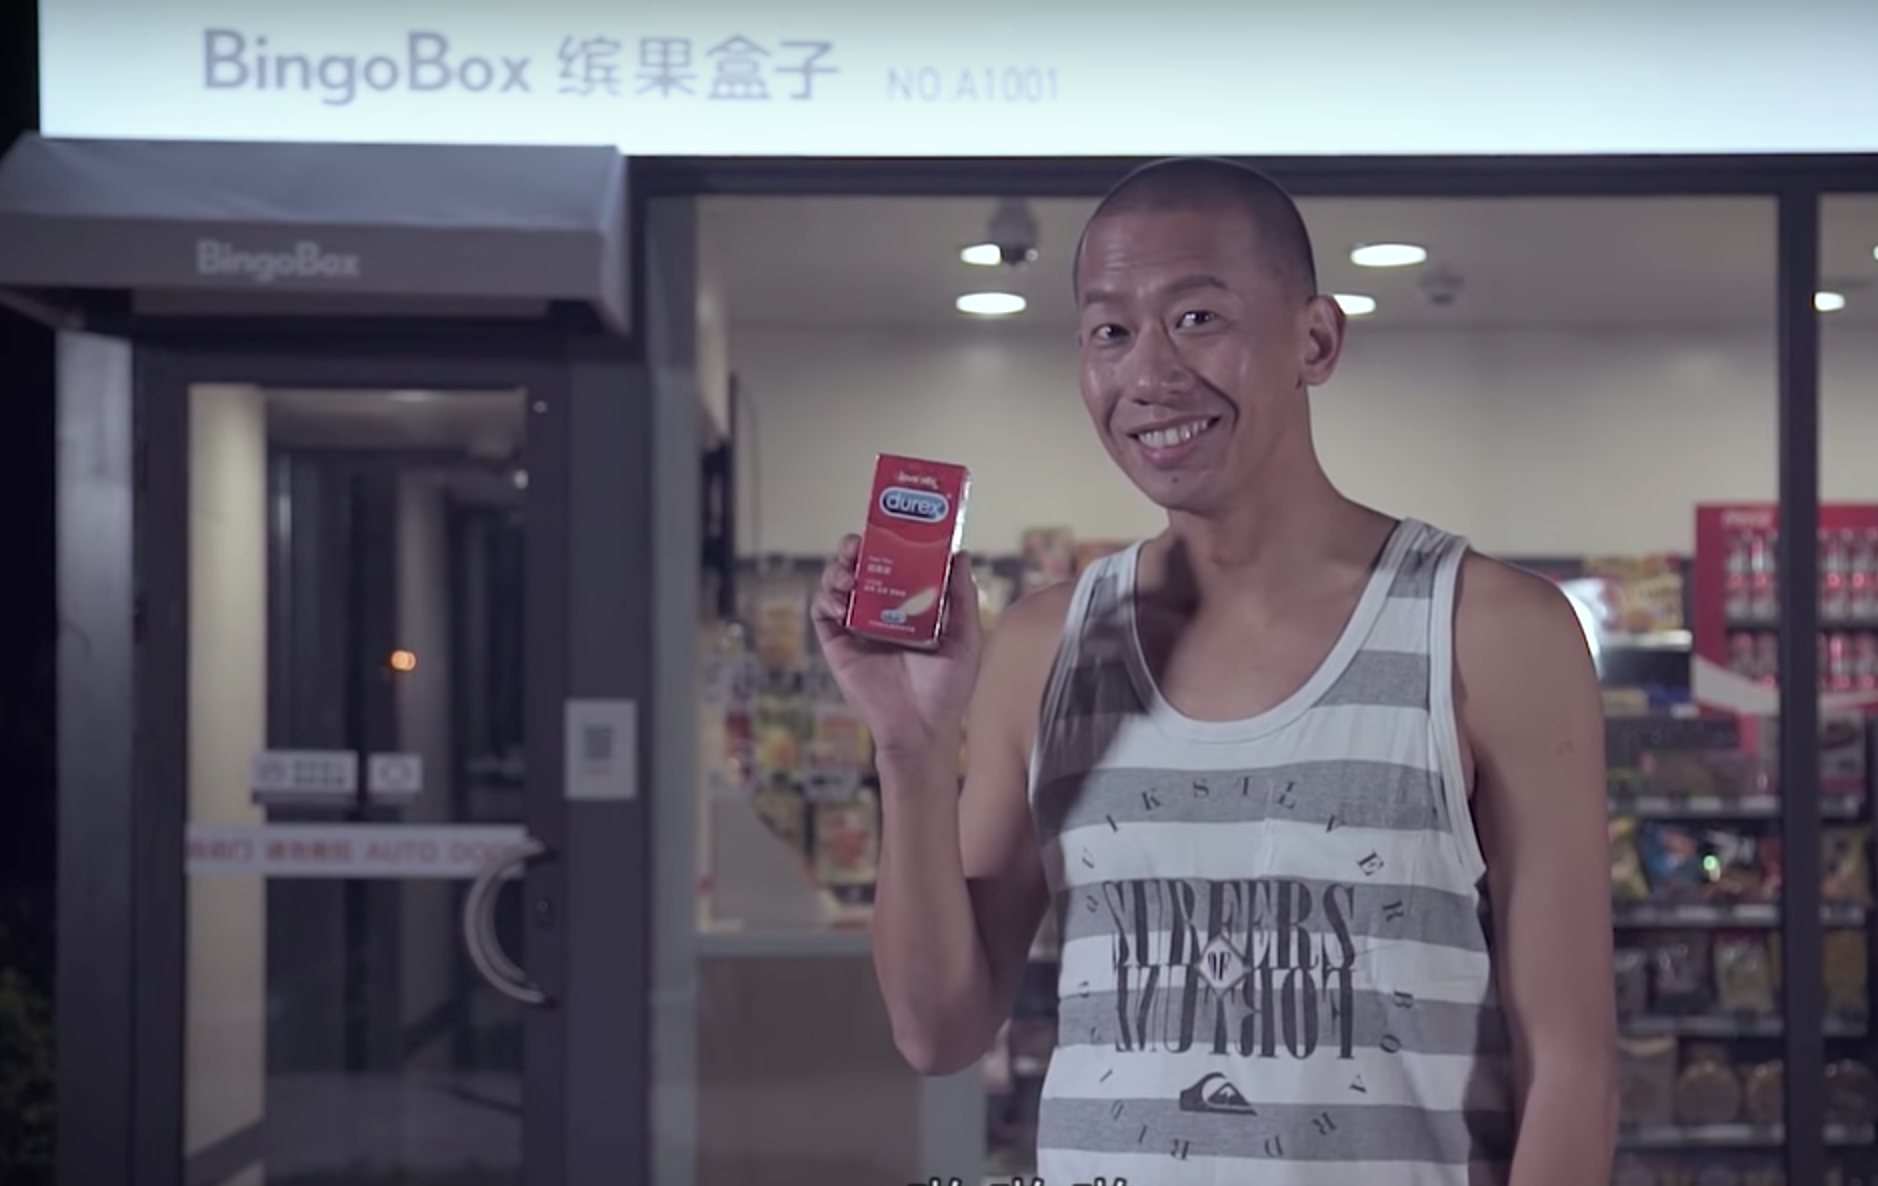 A screen grab from a video about BingoBox stores published by the China Channel
